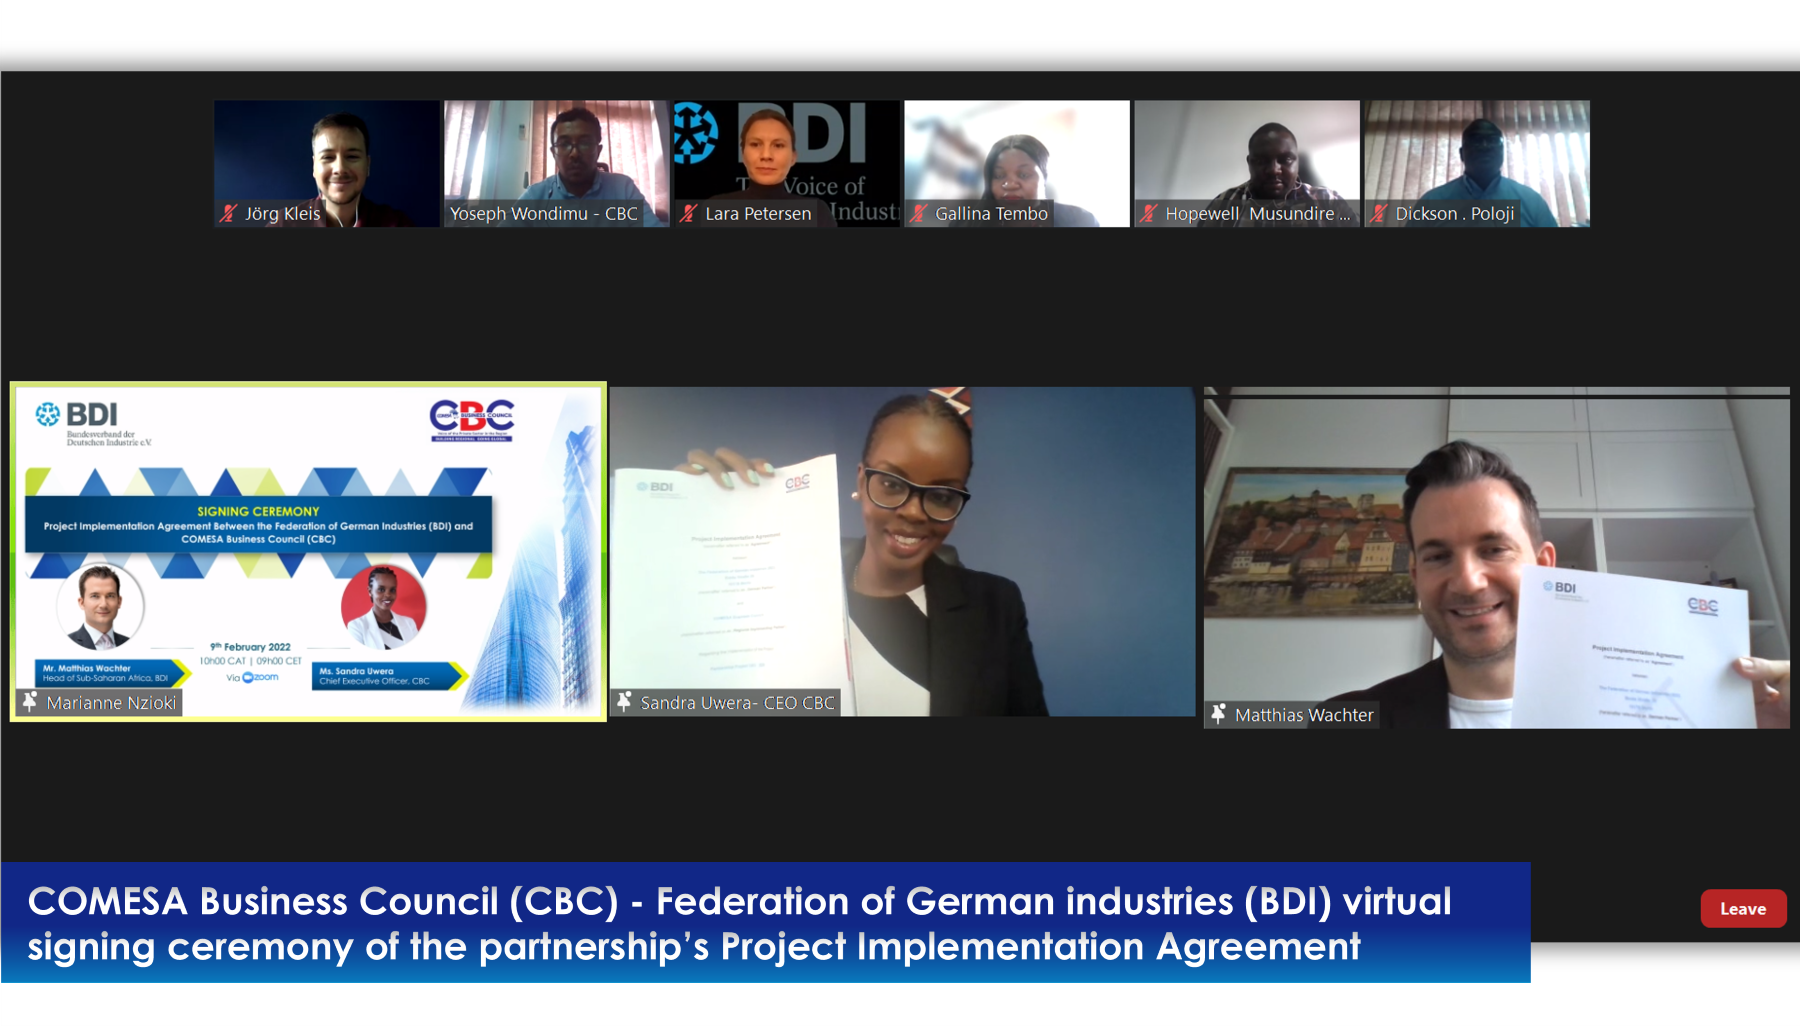 BDI-CBC Project Implementation Agreement signing ceremony